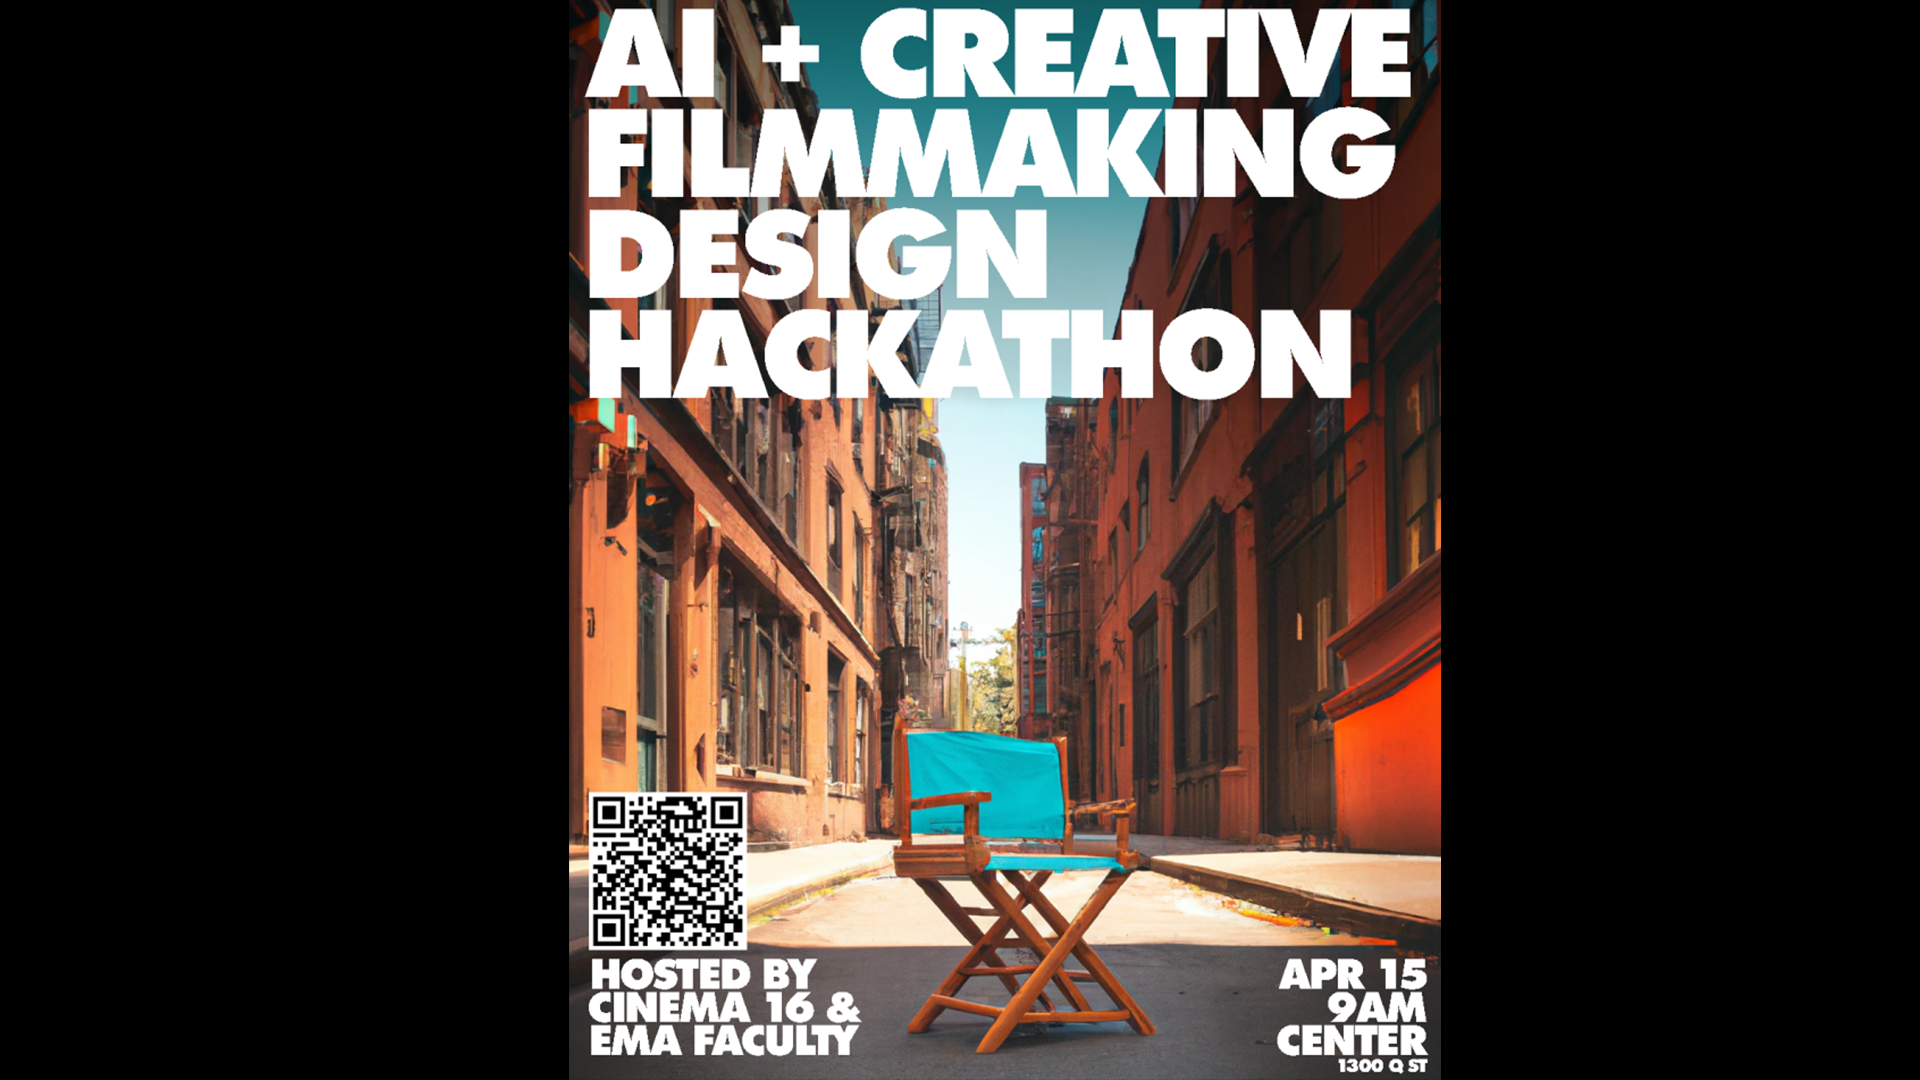 , intensive AI filmmaking hackathon will be held on April 15 at the Johnny Carson Center for Emerging Media Arts.